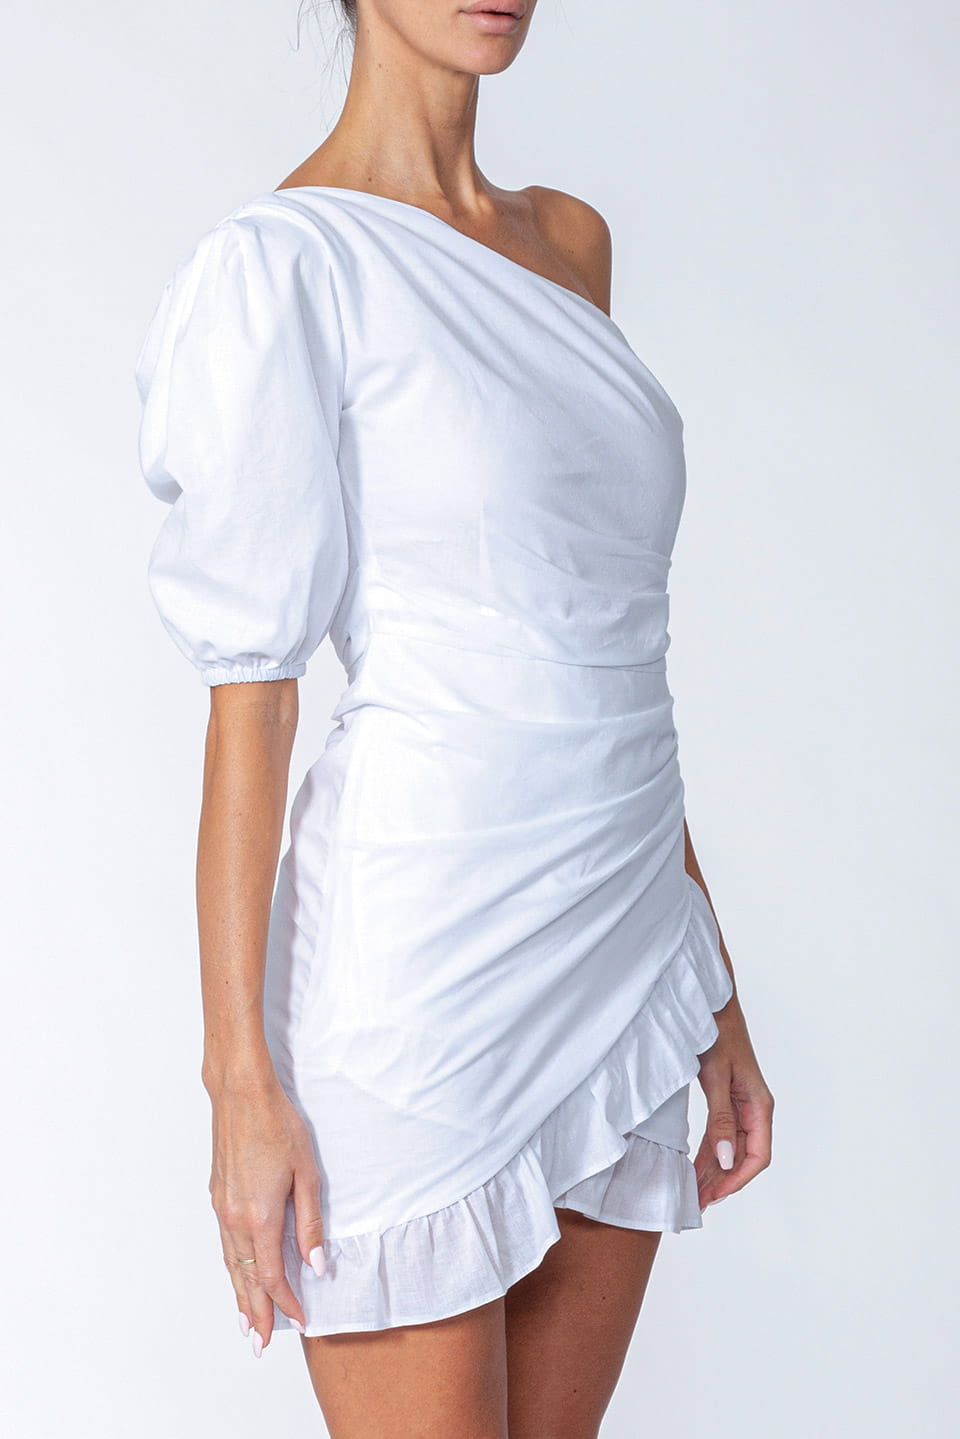 Thumbnail for Product gallery 2, Trendy dress from fashion designer to shop online in UAE. Free delivery white short dress